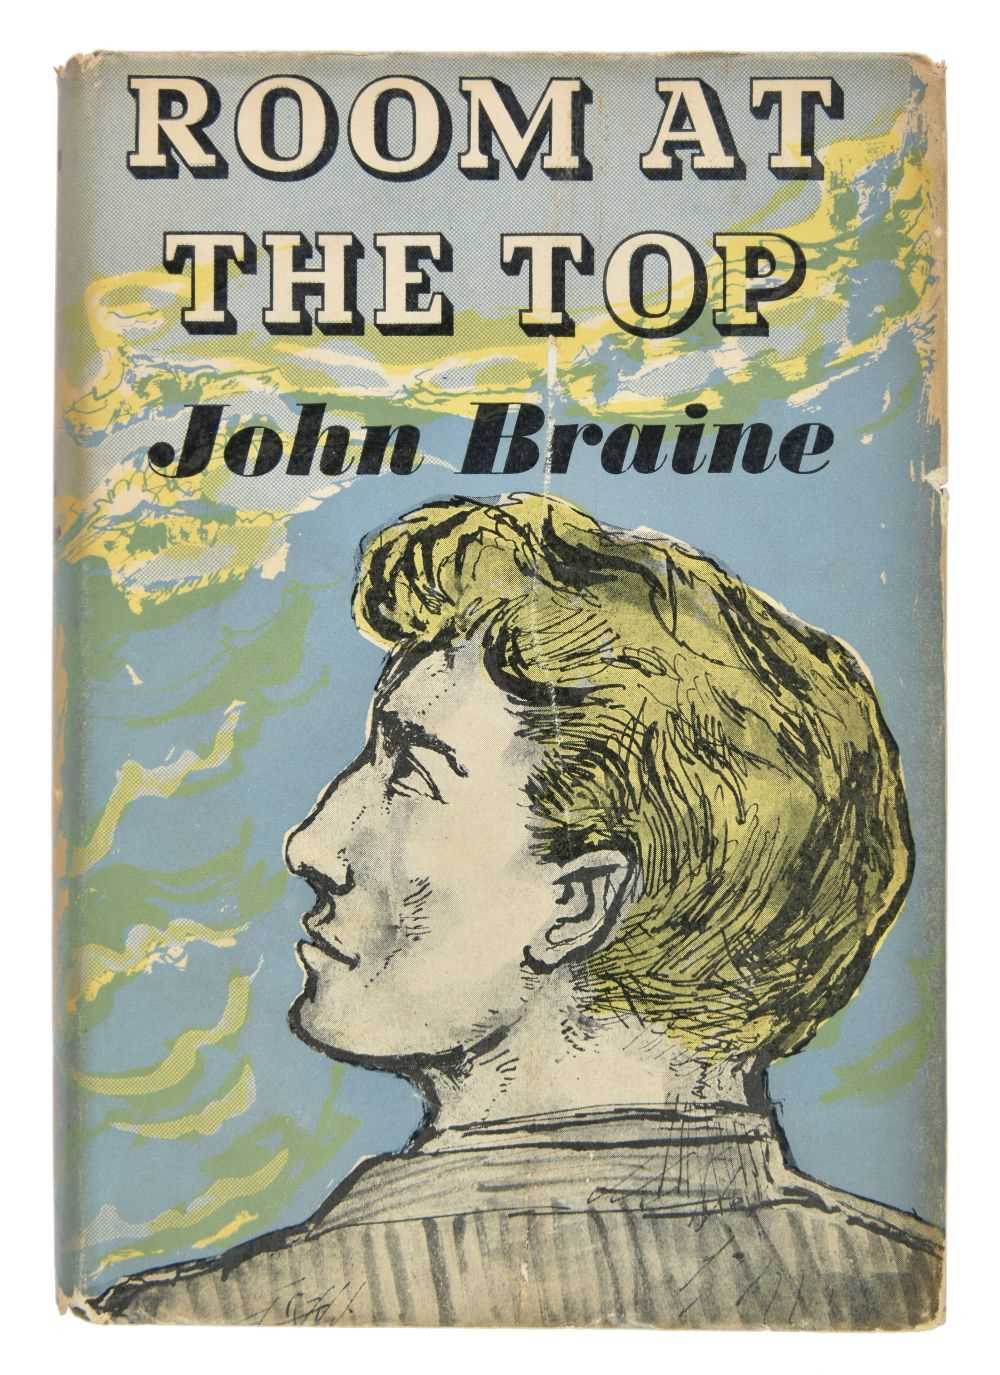 Lot 649 - Braine (John). Room at the Top, 1st edition, 1957